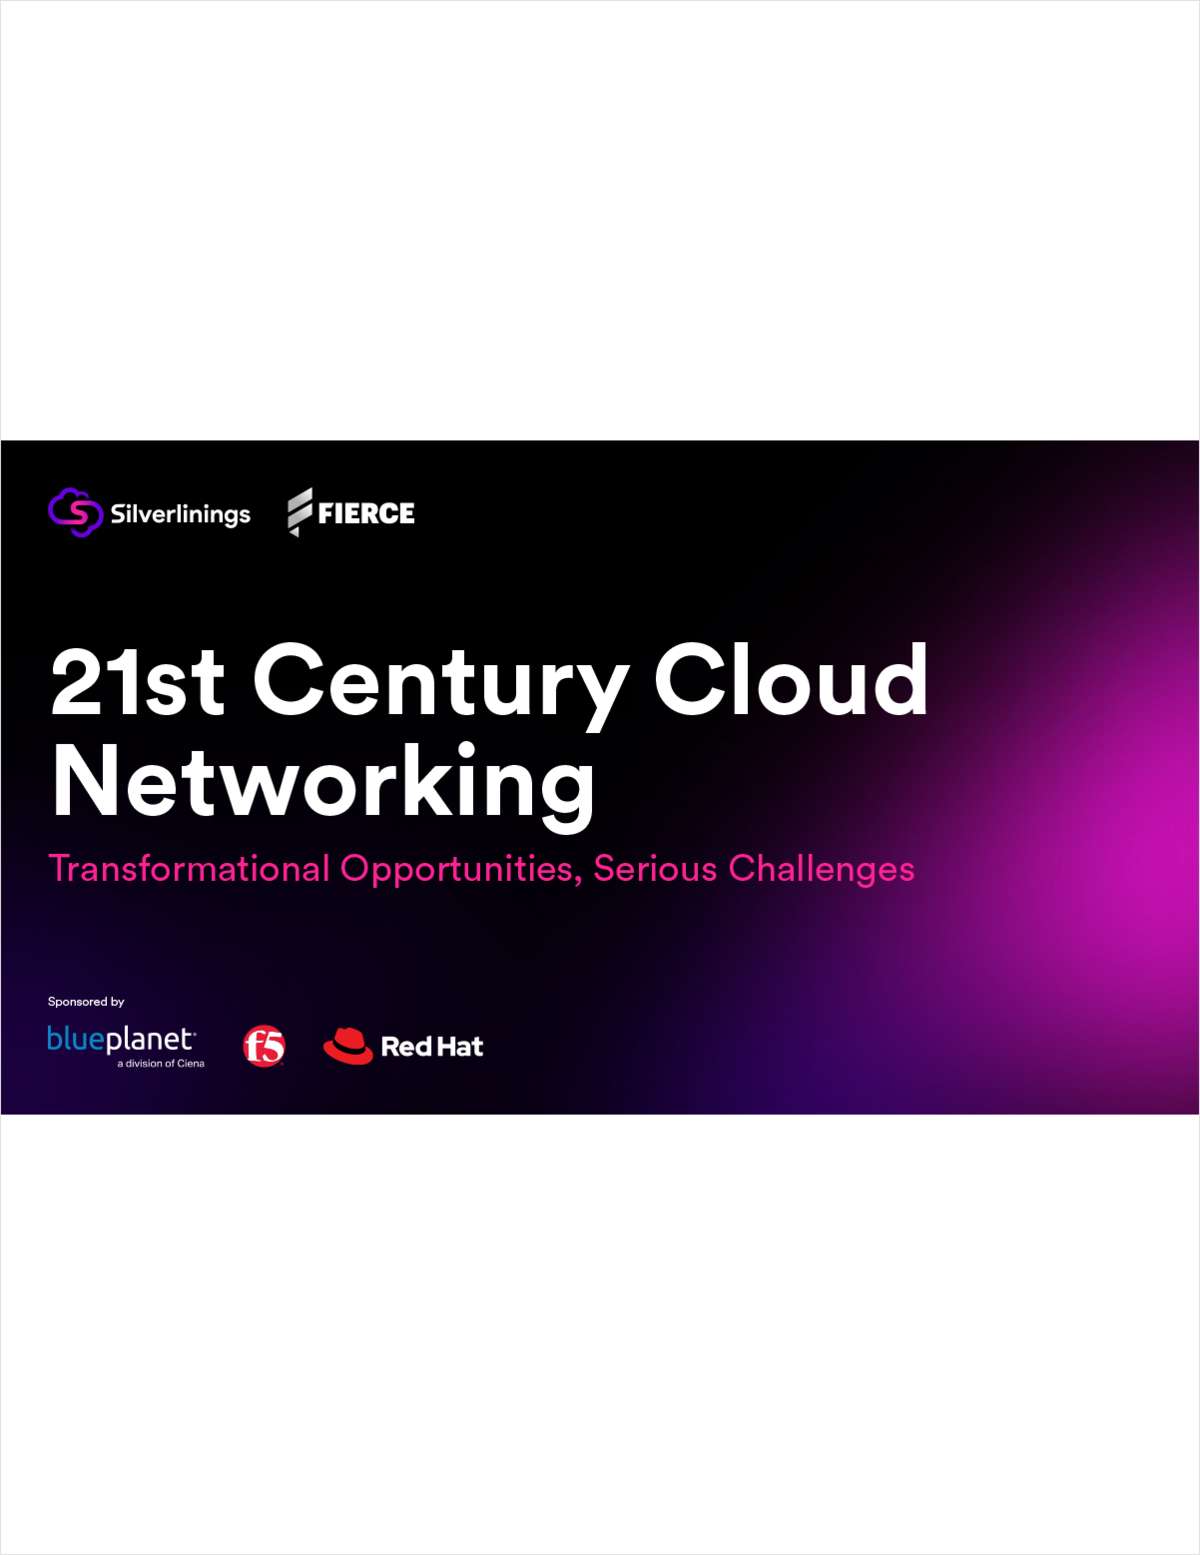 21st Century Cloud Networking: Transformational Opportunities, Serious Challenges